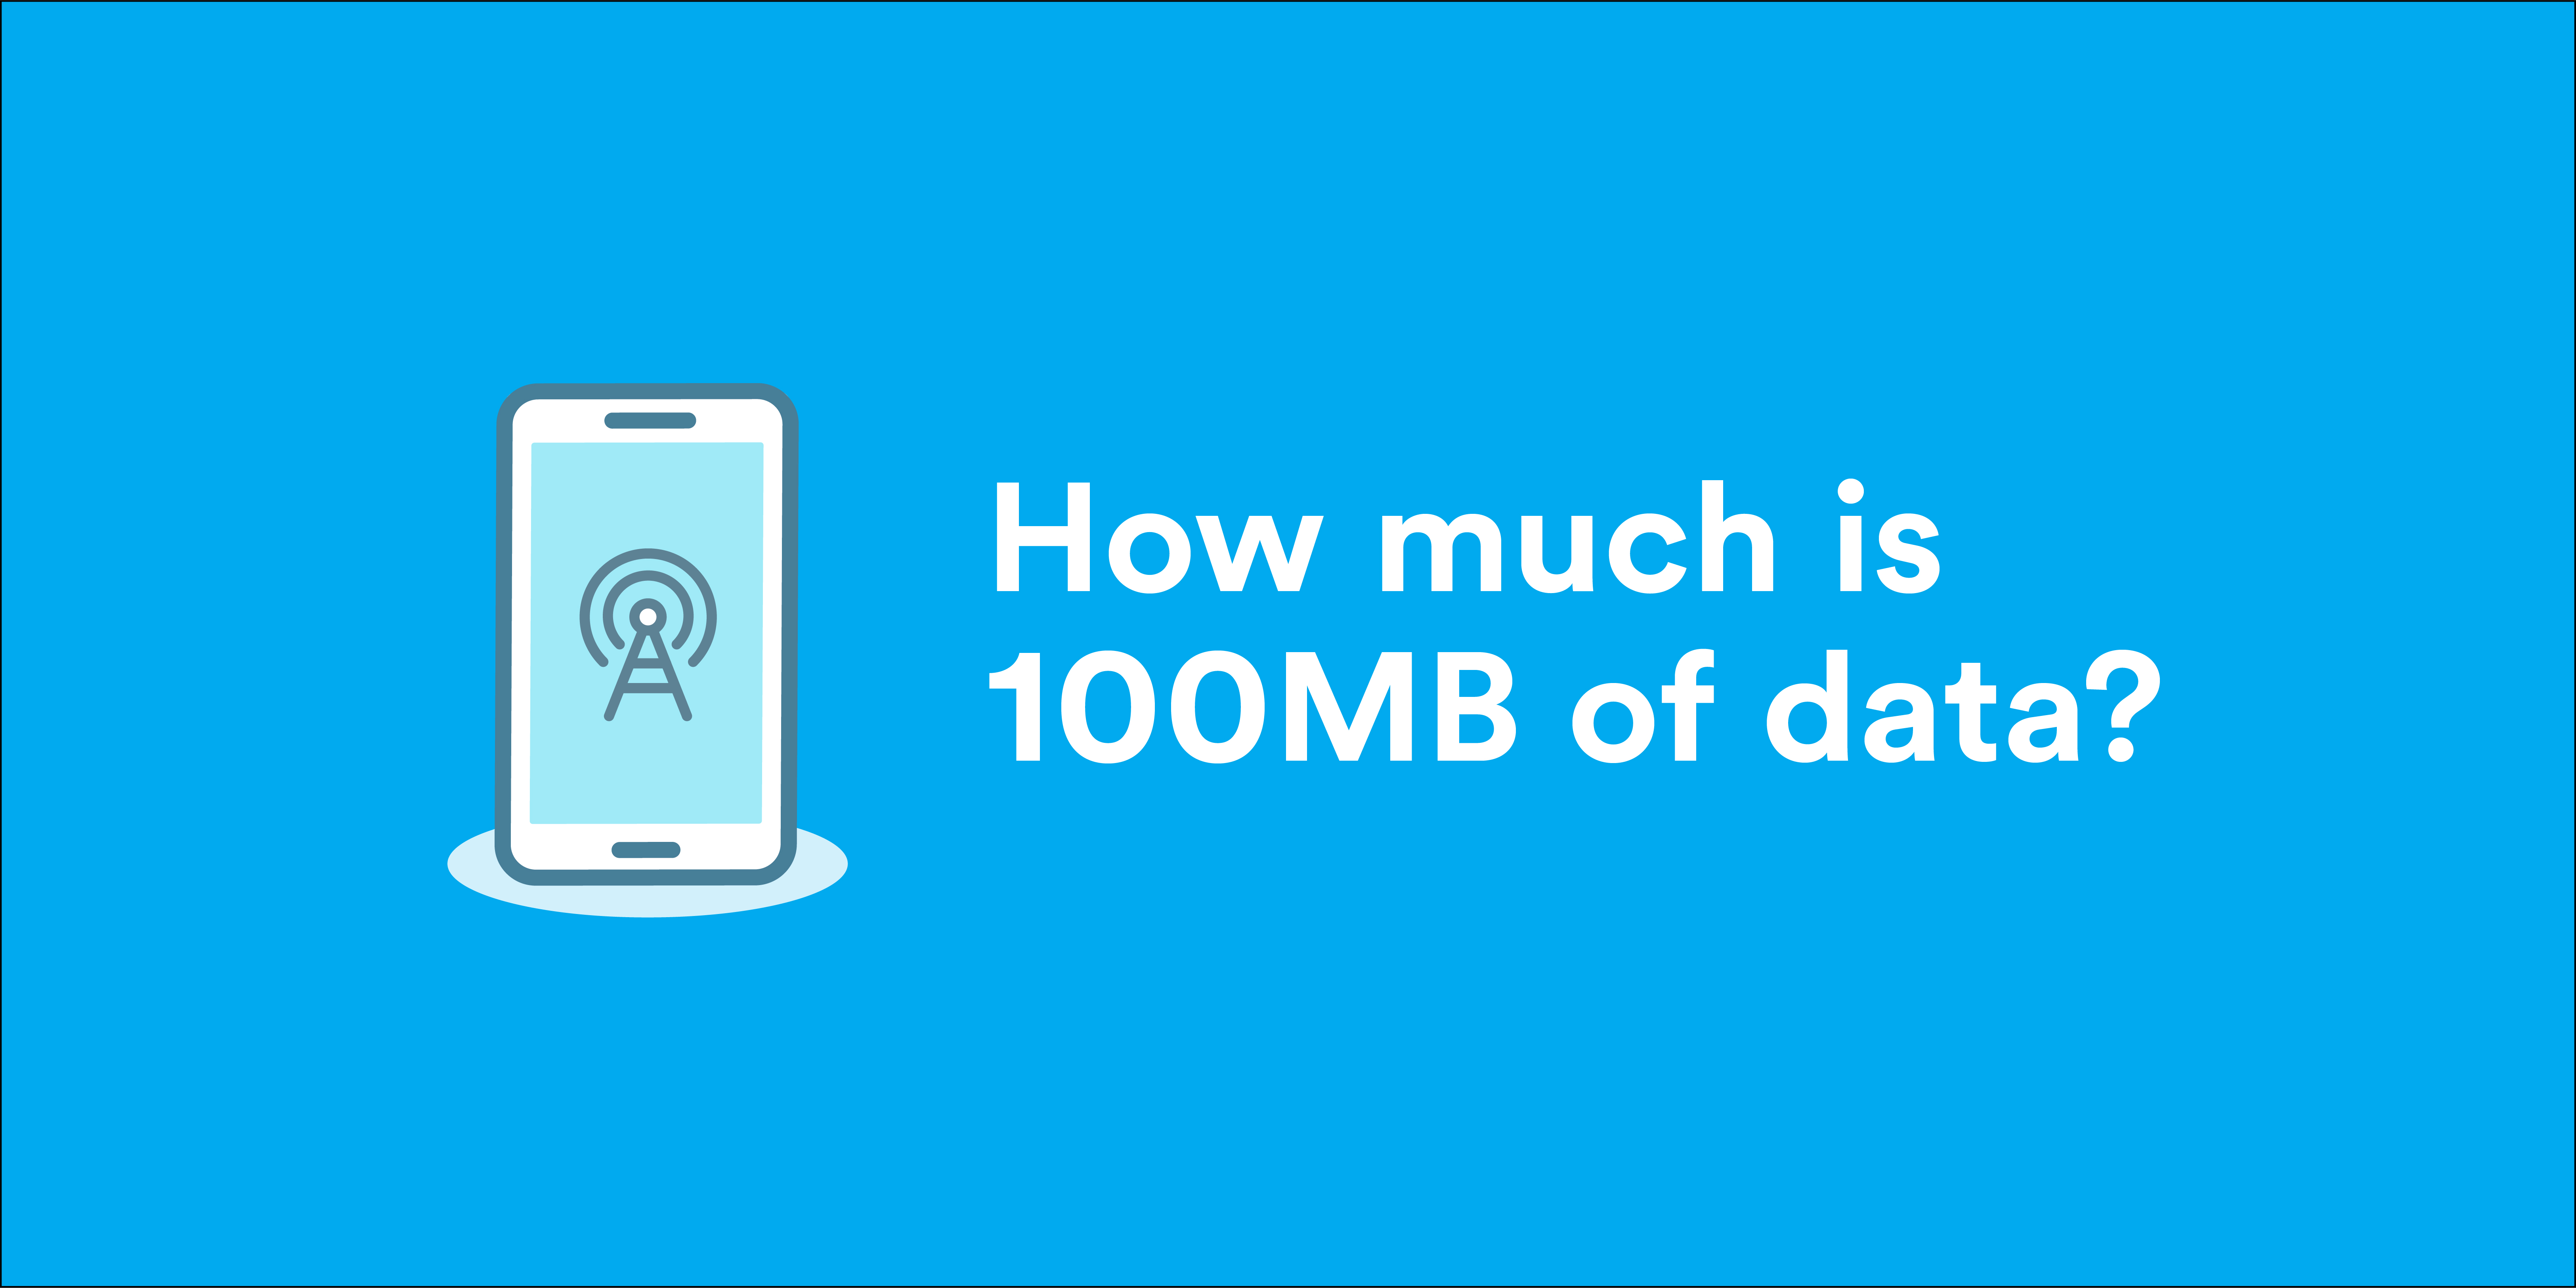 How much is 100MB of data?